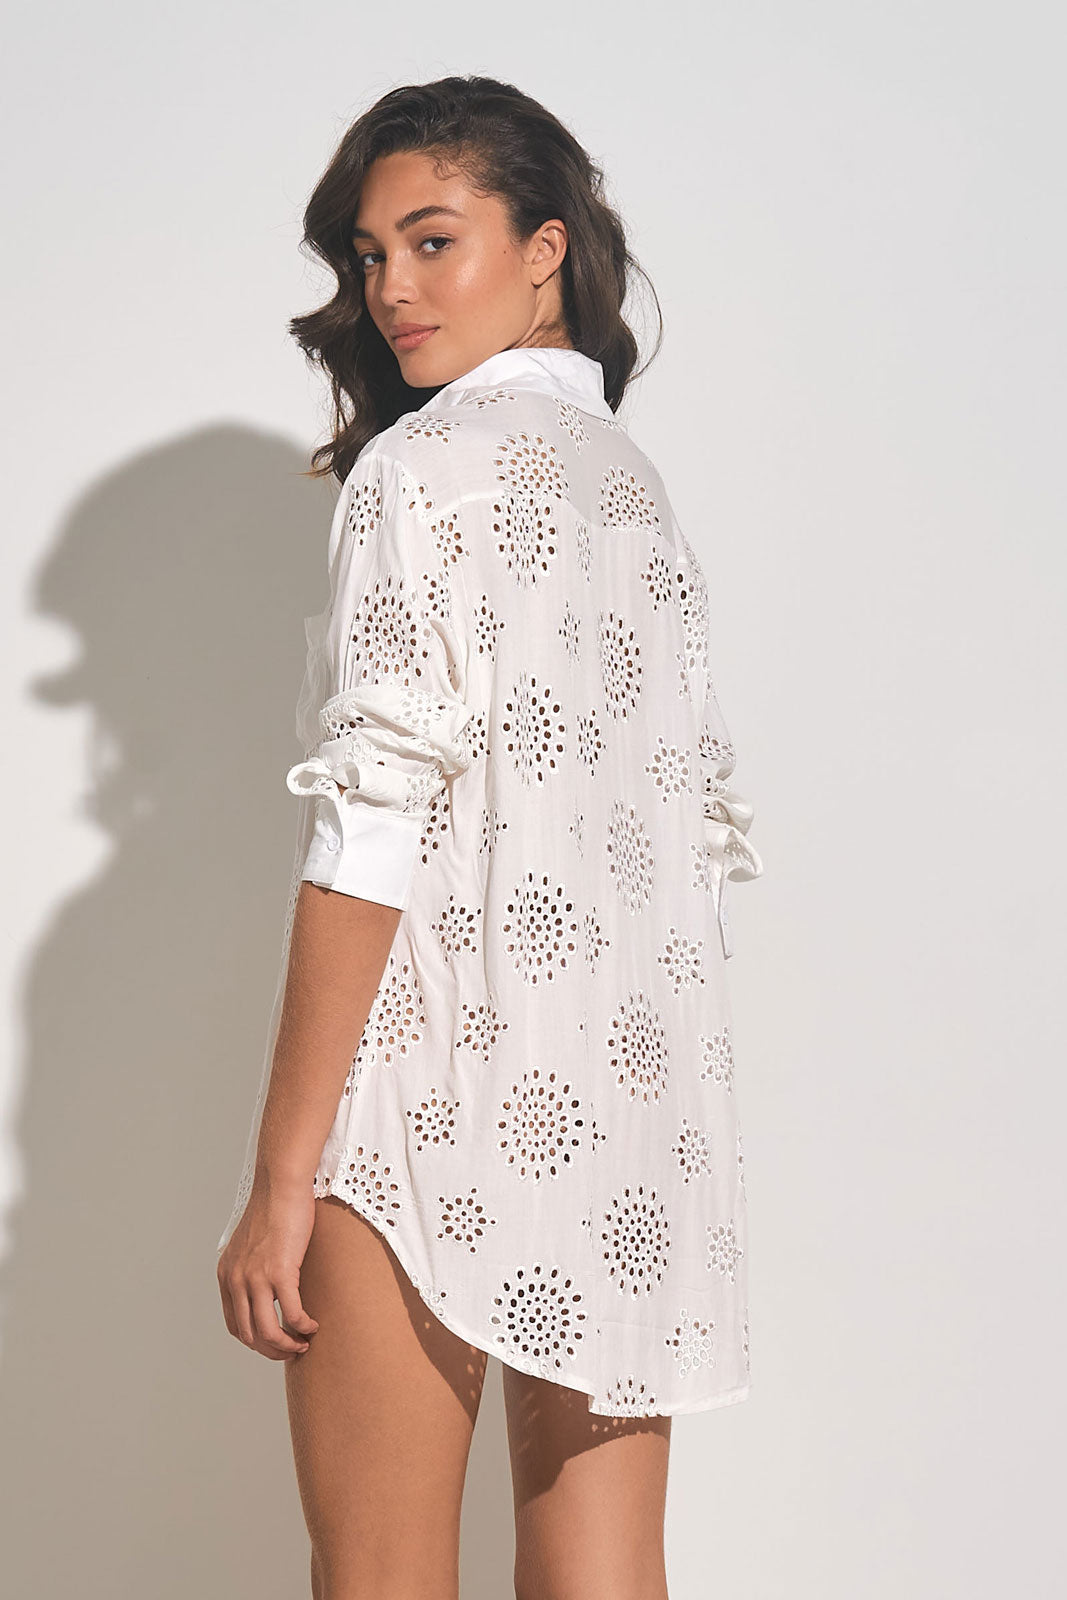 back view of woman wearing a white long sleeve button down cover up shirt with eyelet embroidery throughout